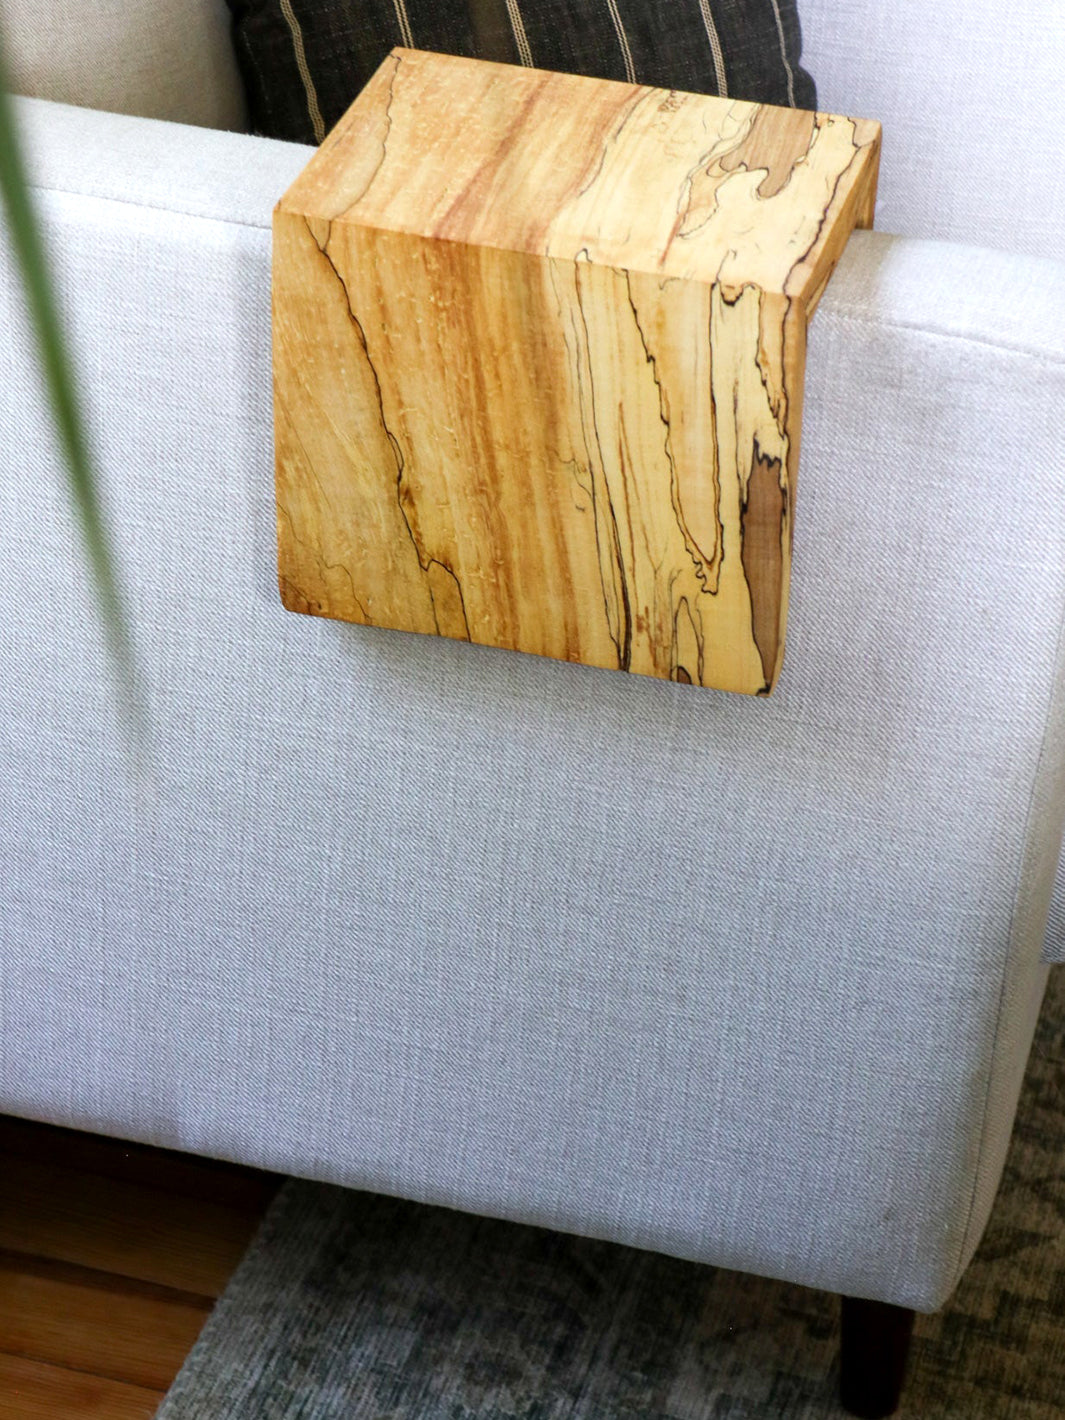 Solid 5" Spalted Maple Sofa Armrest Table (in stock) Earthly Comfort Arm Table 2230-5